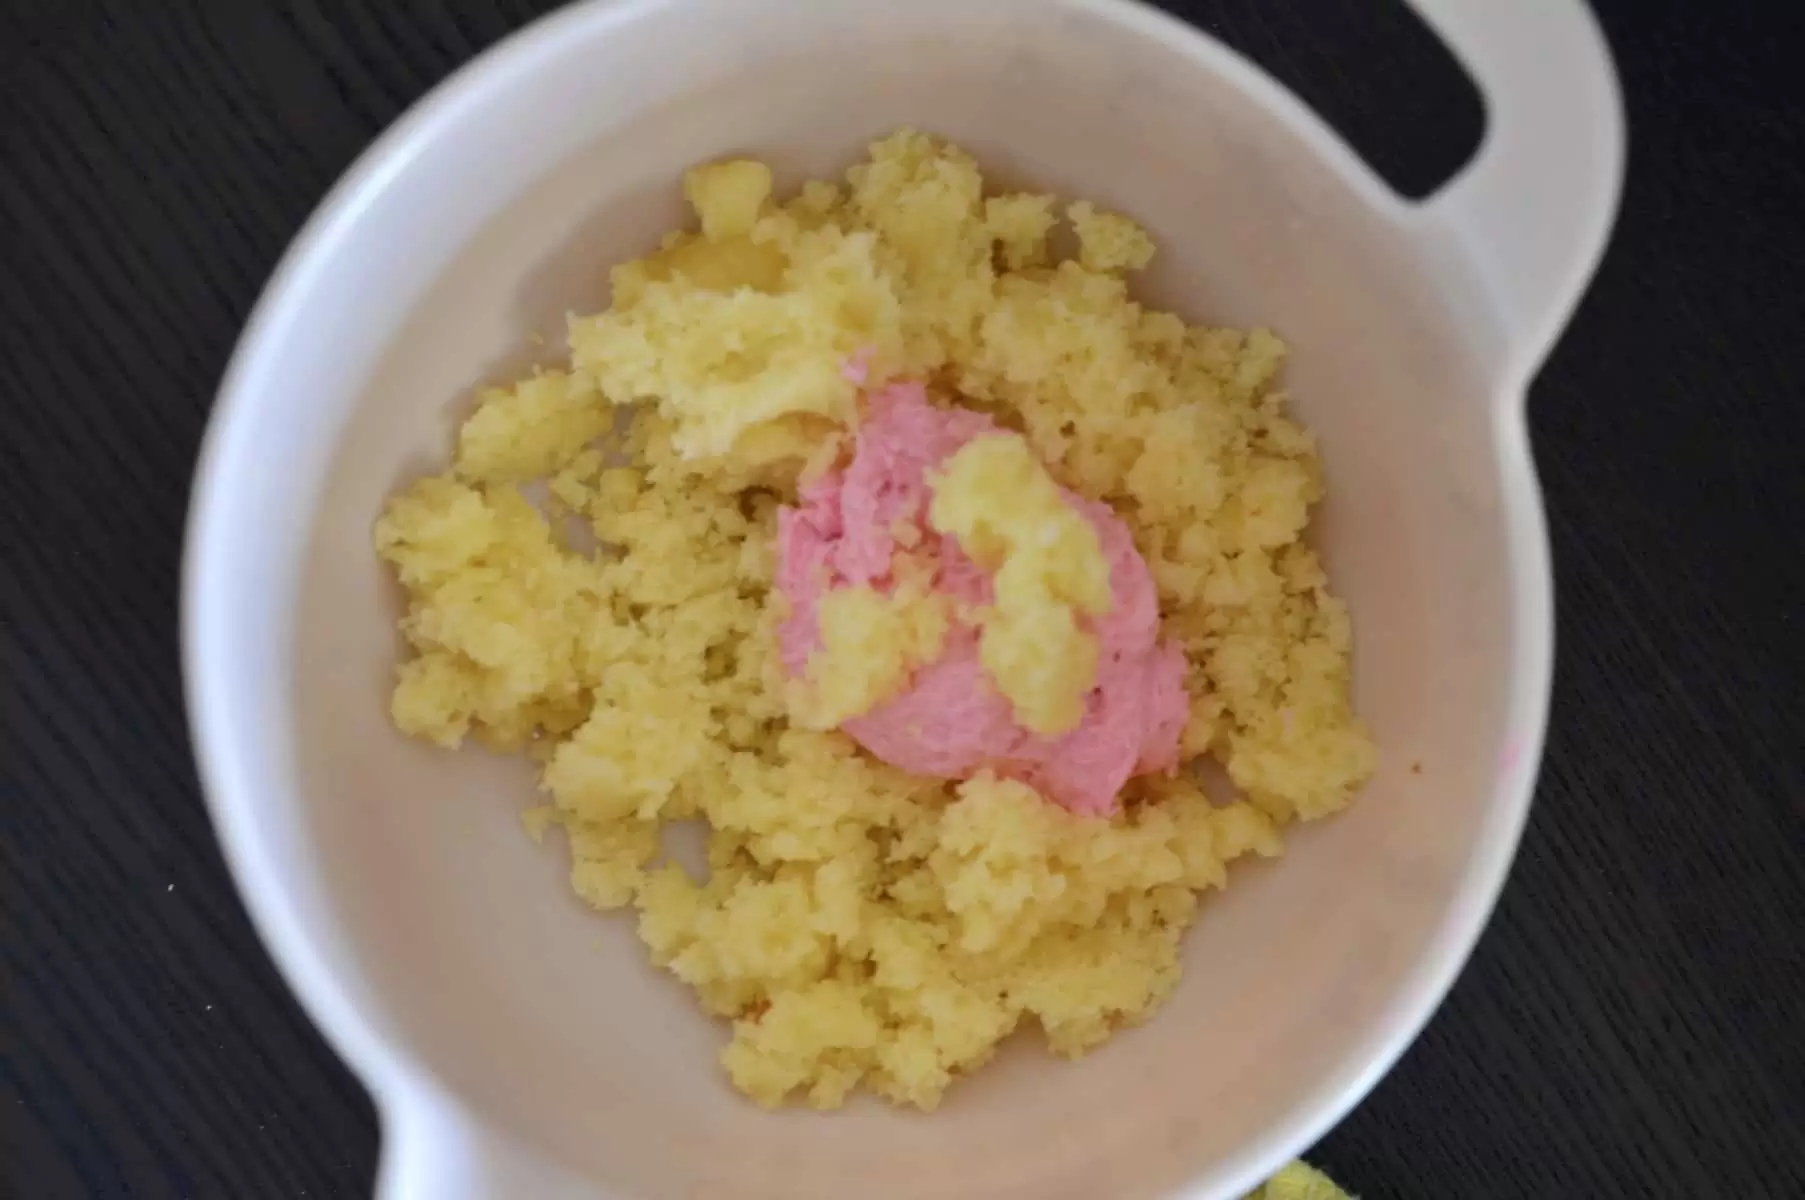 cake pieces in a bowl with pink frosting